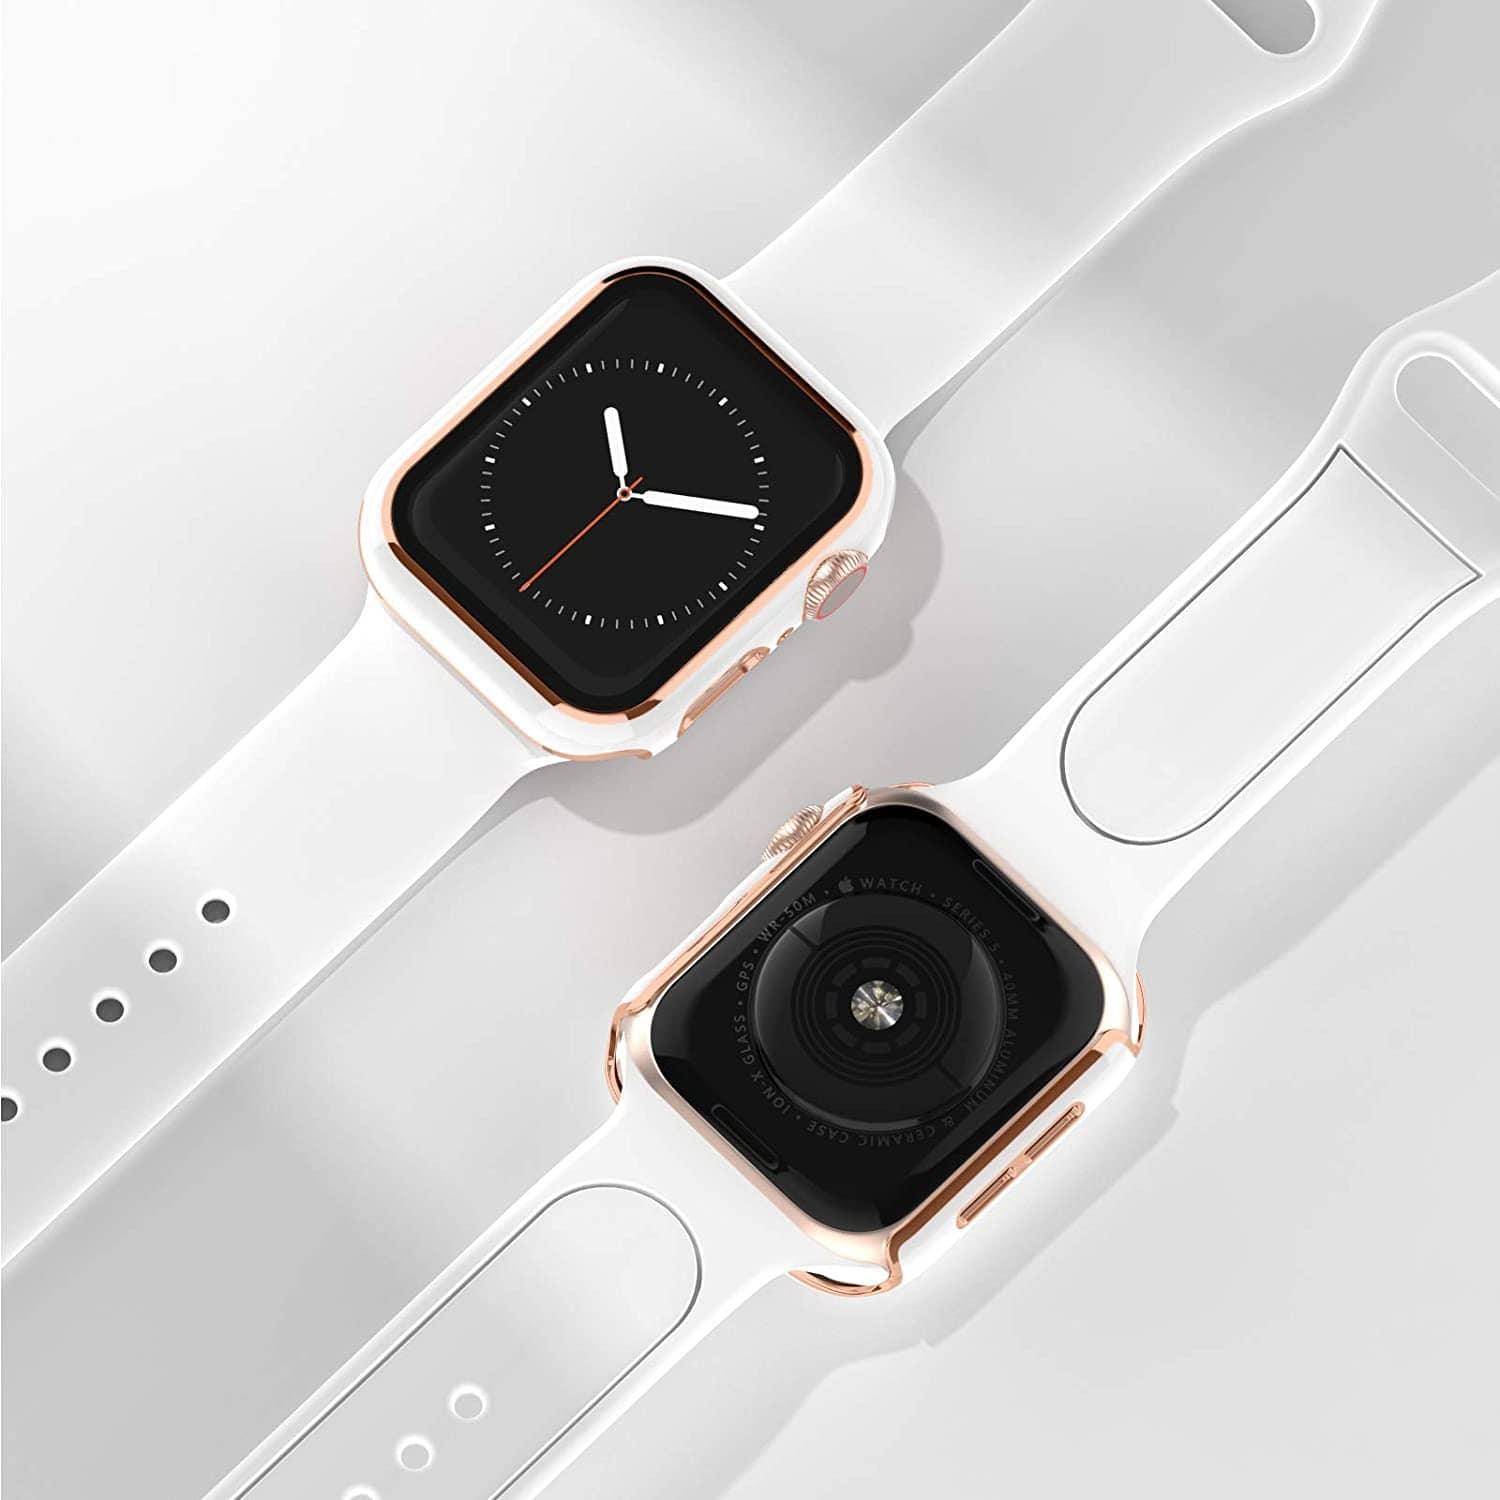 Apple Watch Bands and Cases: Elevate Your Style and Protection